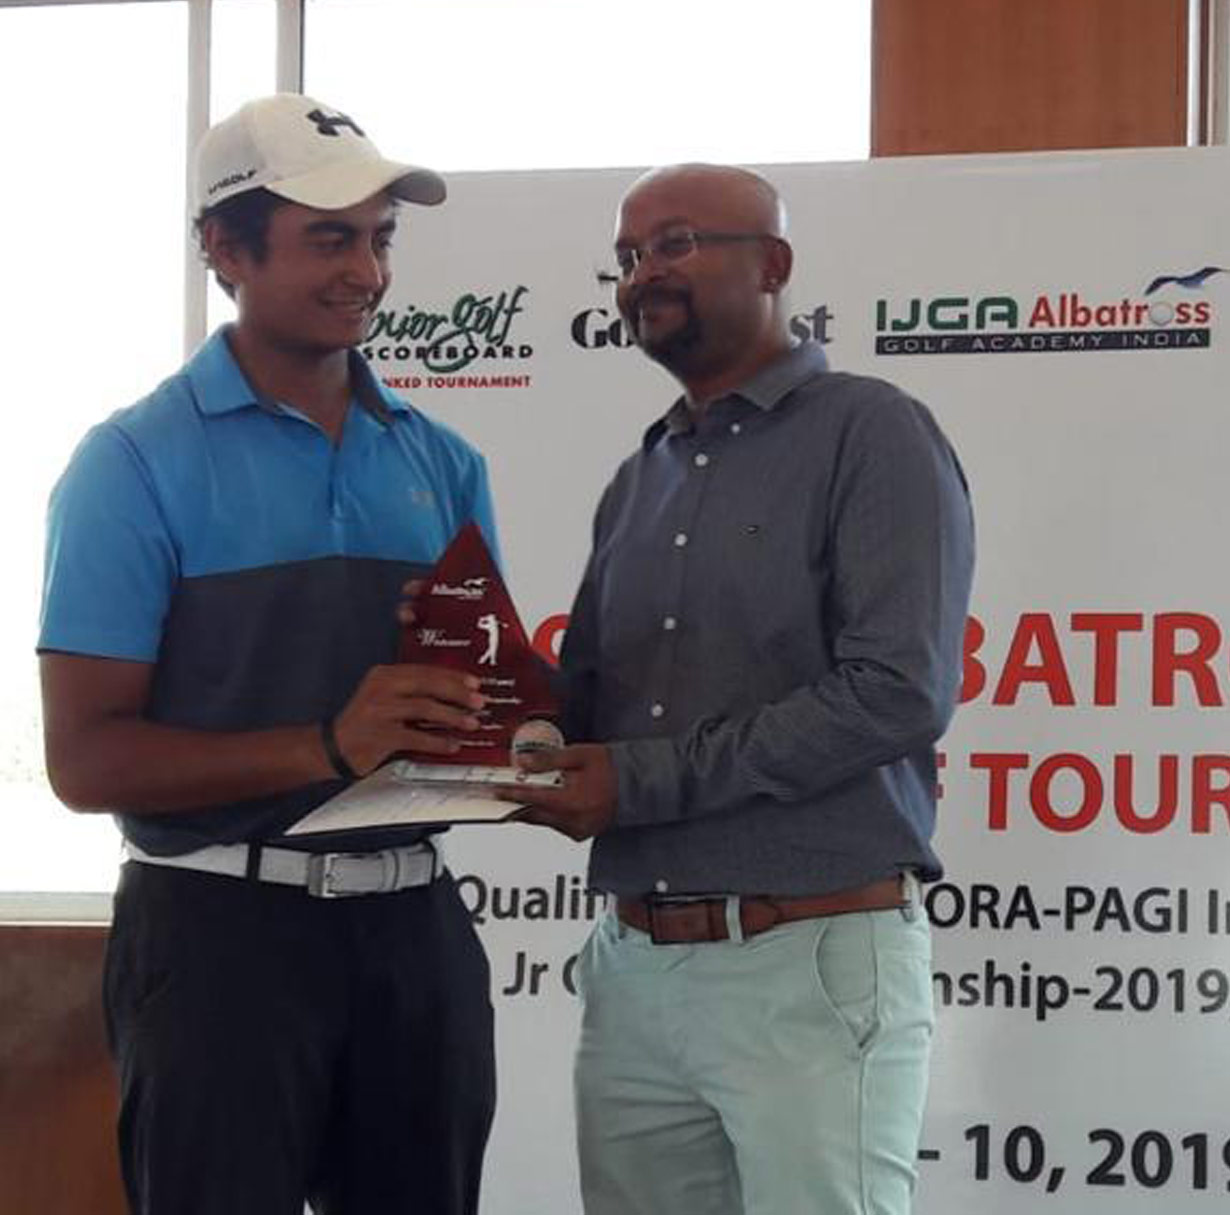 Krishiv has a fantastic outing at the Albatross tournament to win the category A boys